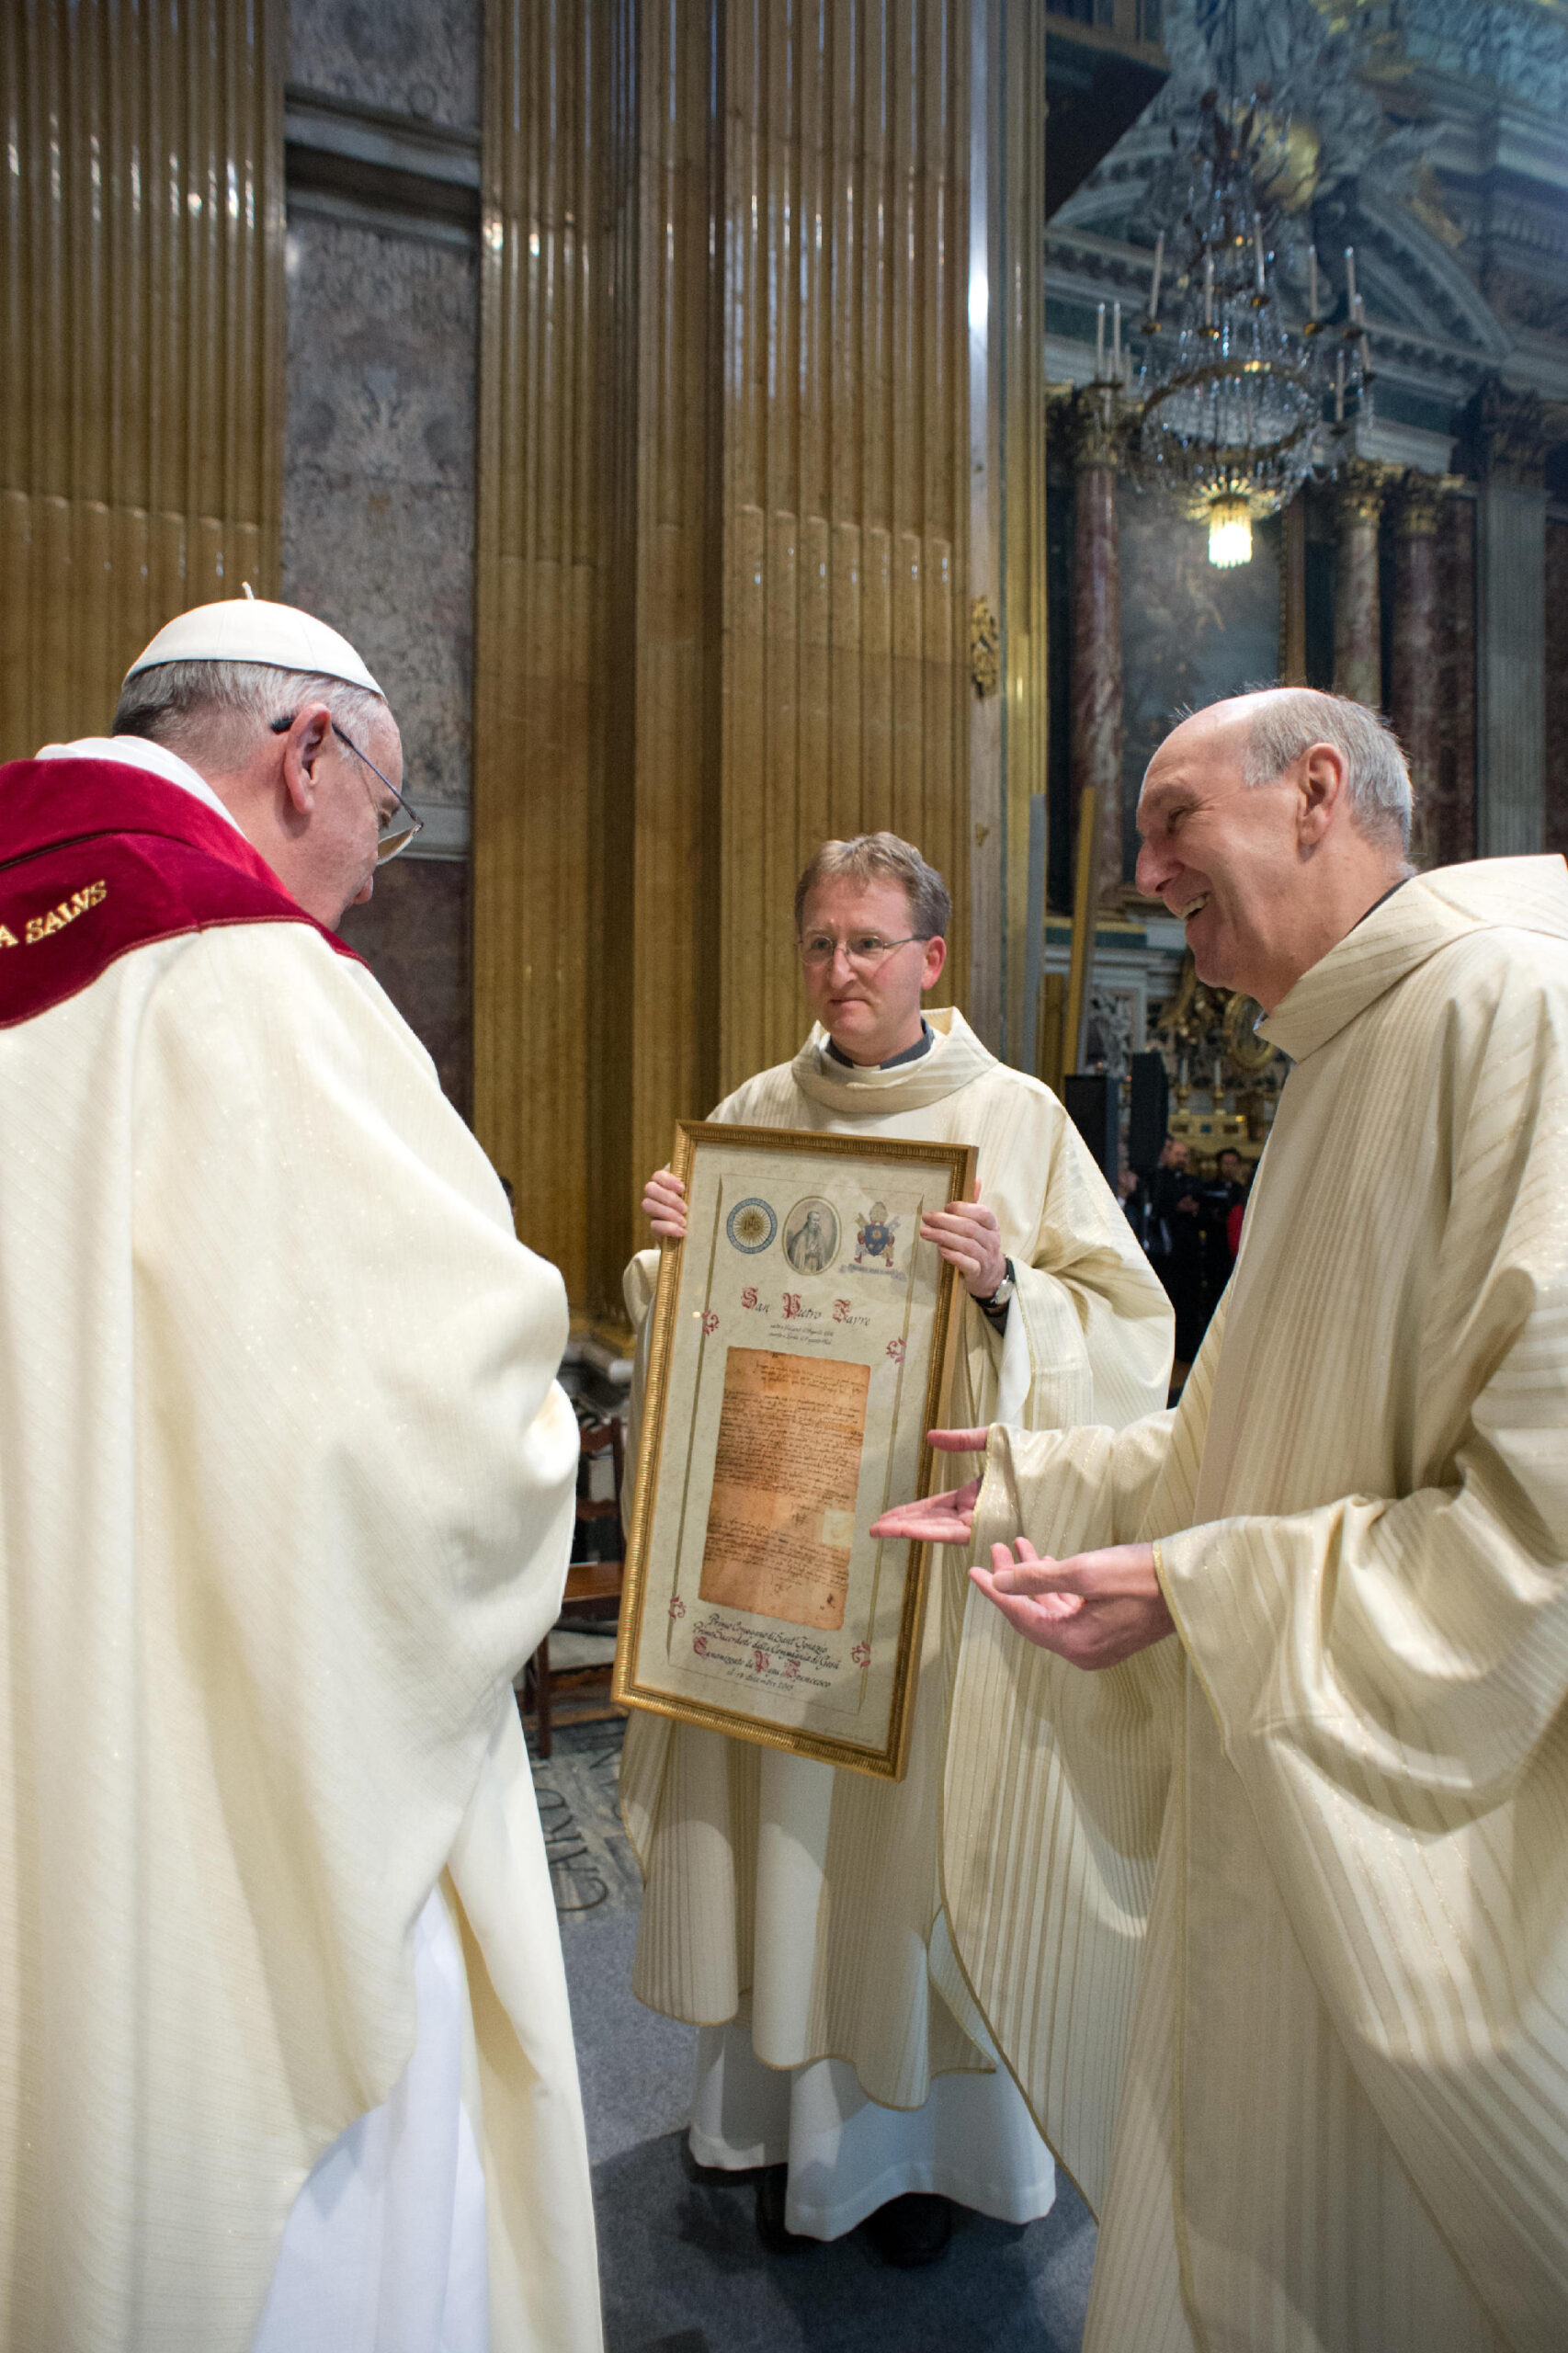 In this photo provided by the Vatican paper L'Osservatore Romano, Pope Francis celebrates a mass with the Jesuits on the occasion of the order's titular feast, in Rome's Jesus' Church, Friday, Jan. 3, 2014. (AP Photo/Osservatore Romano, ho)